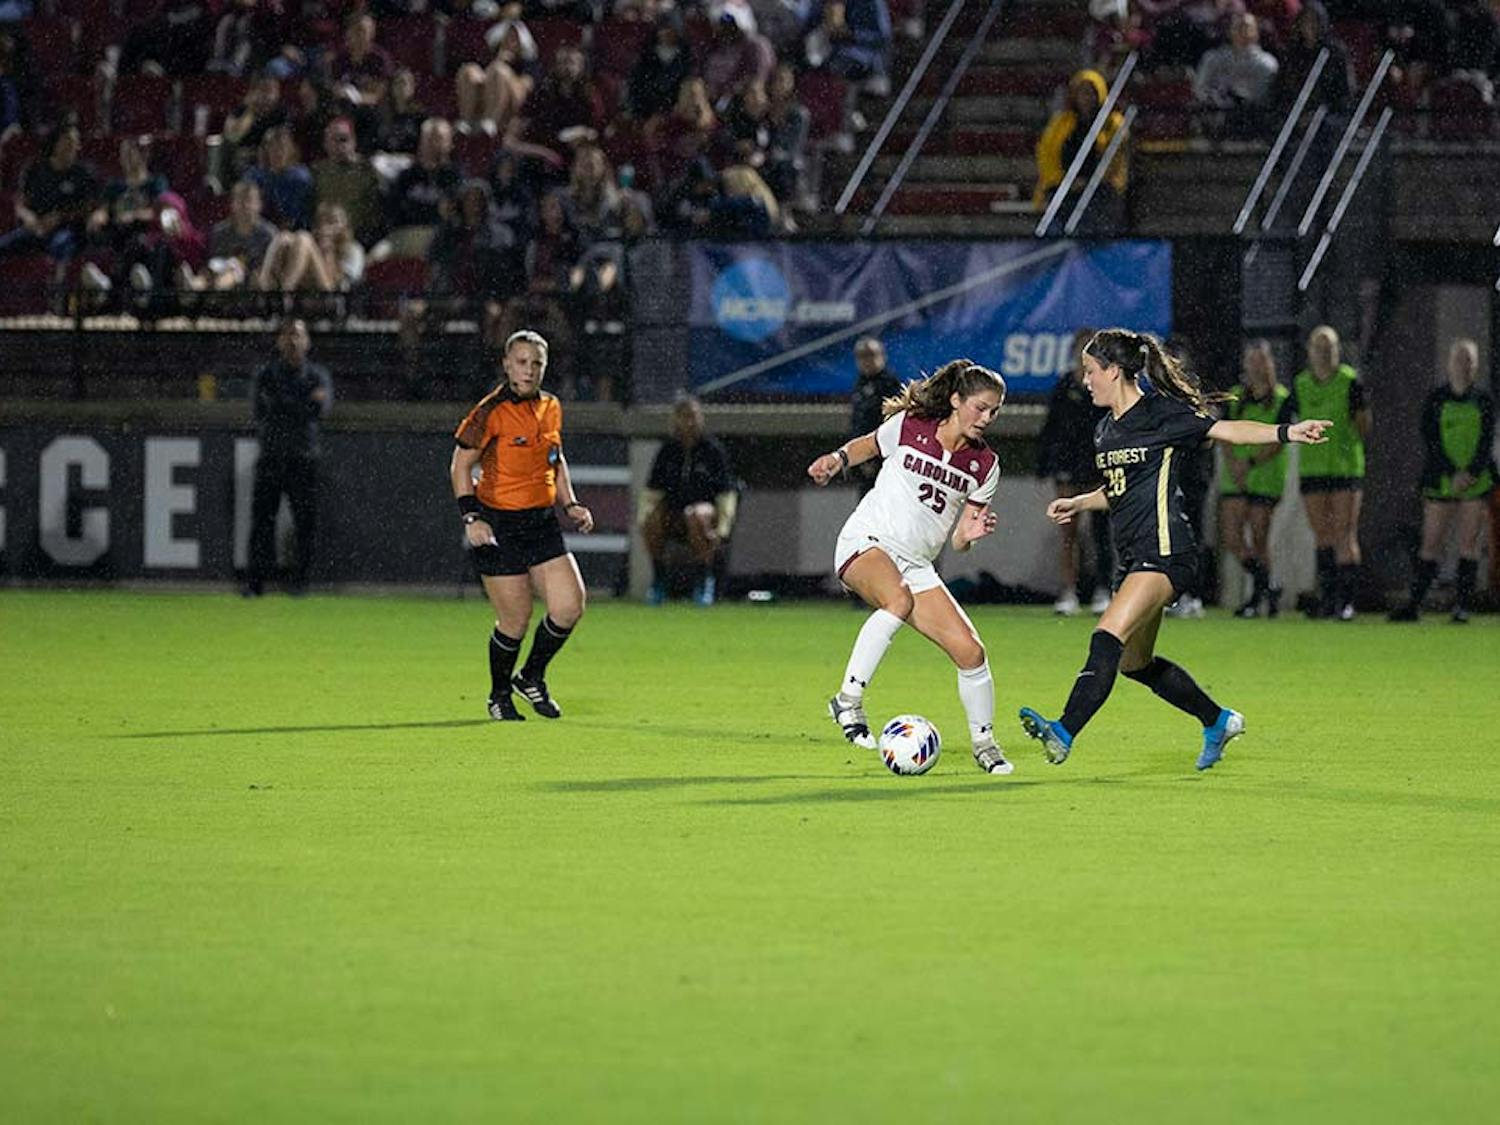 With minutes left on the clock closing in on the end of the first half, sophomore midfielder Lily Render keeps hold of the ball from the Wake Forest player. By the end of the first half, the Gamecocks had scored one goal making the game 1-0 against Wake Forest at Stone Stadium on Nov. 12, 2022.